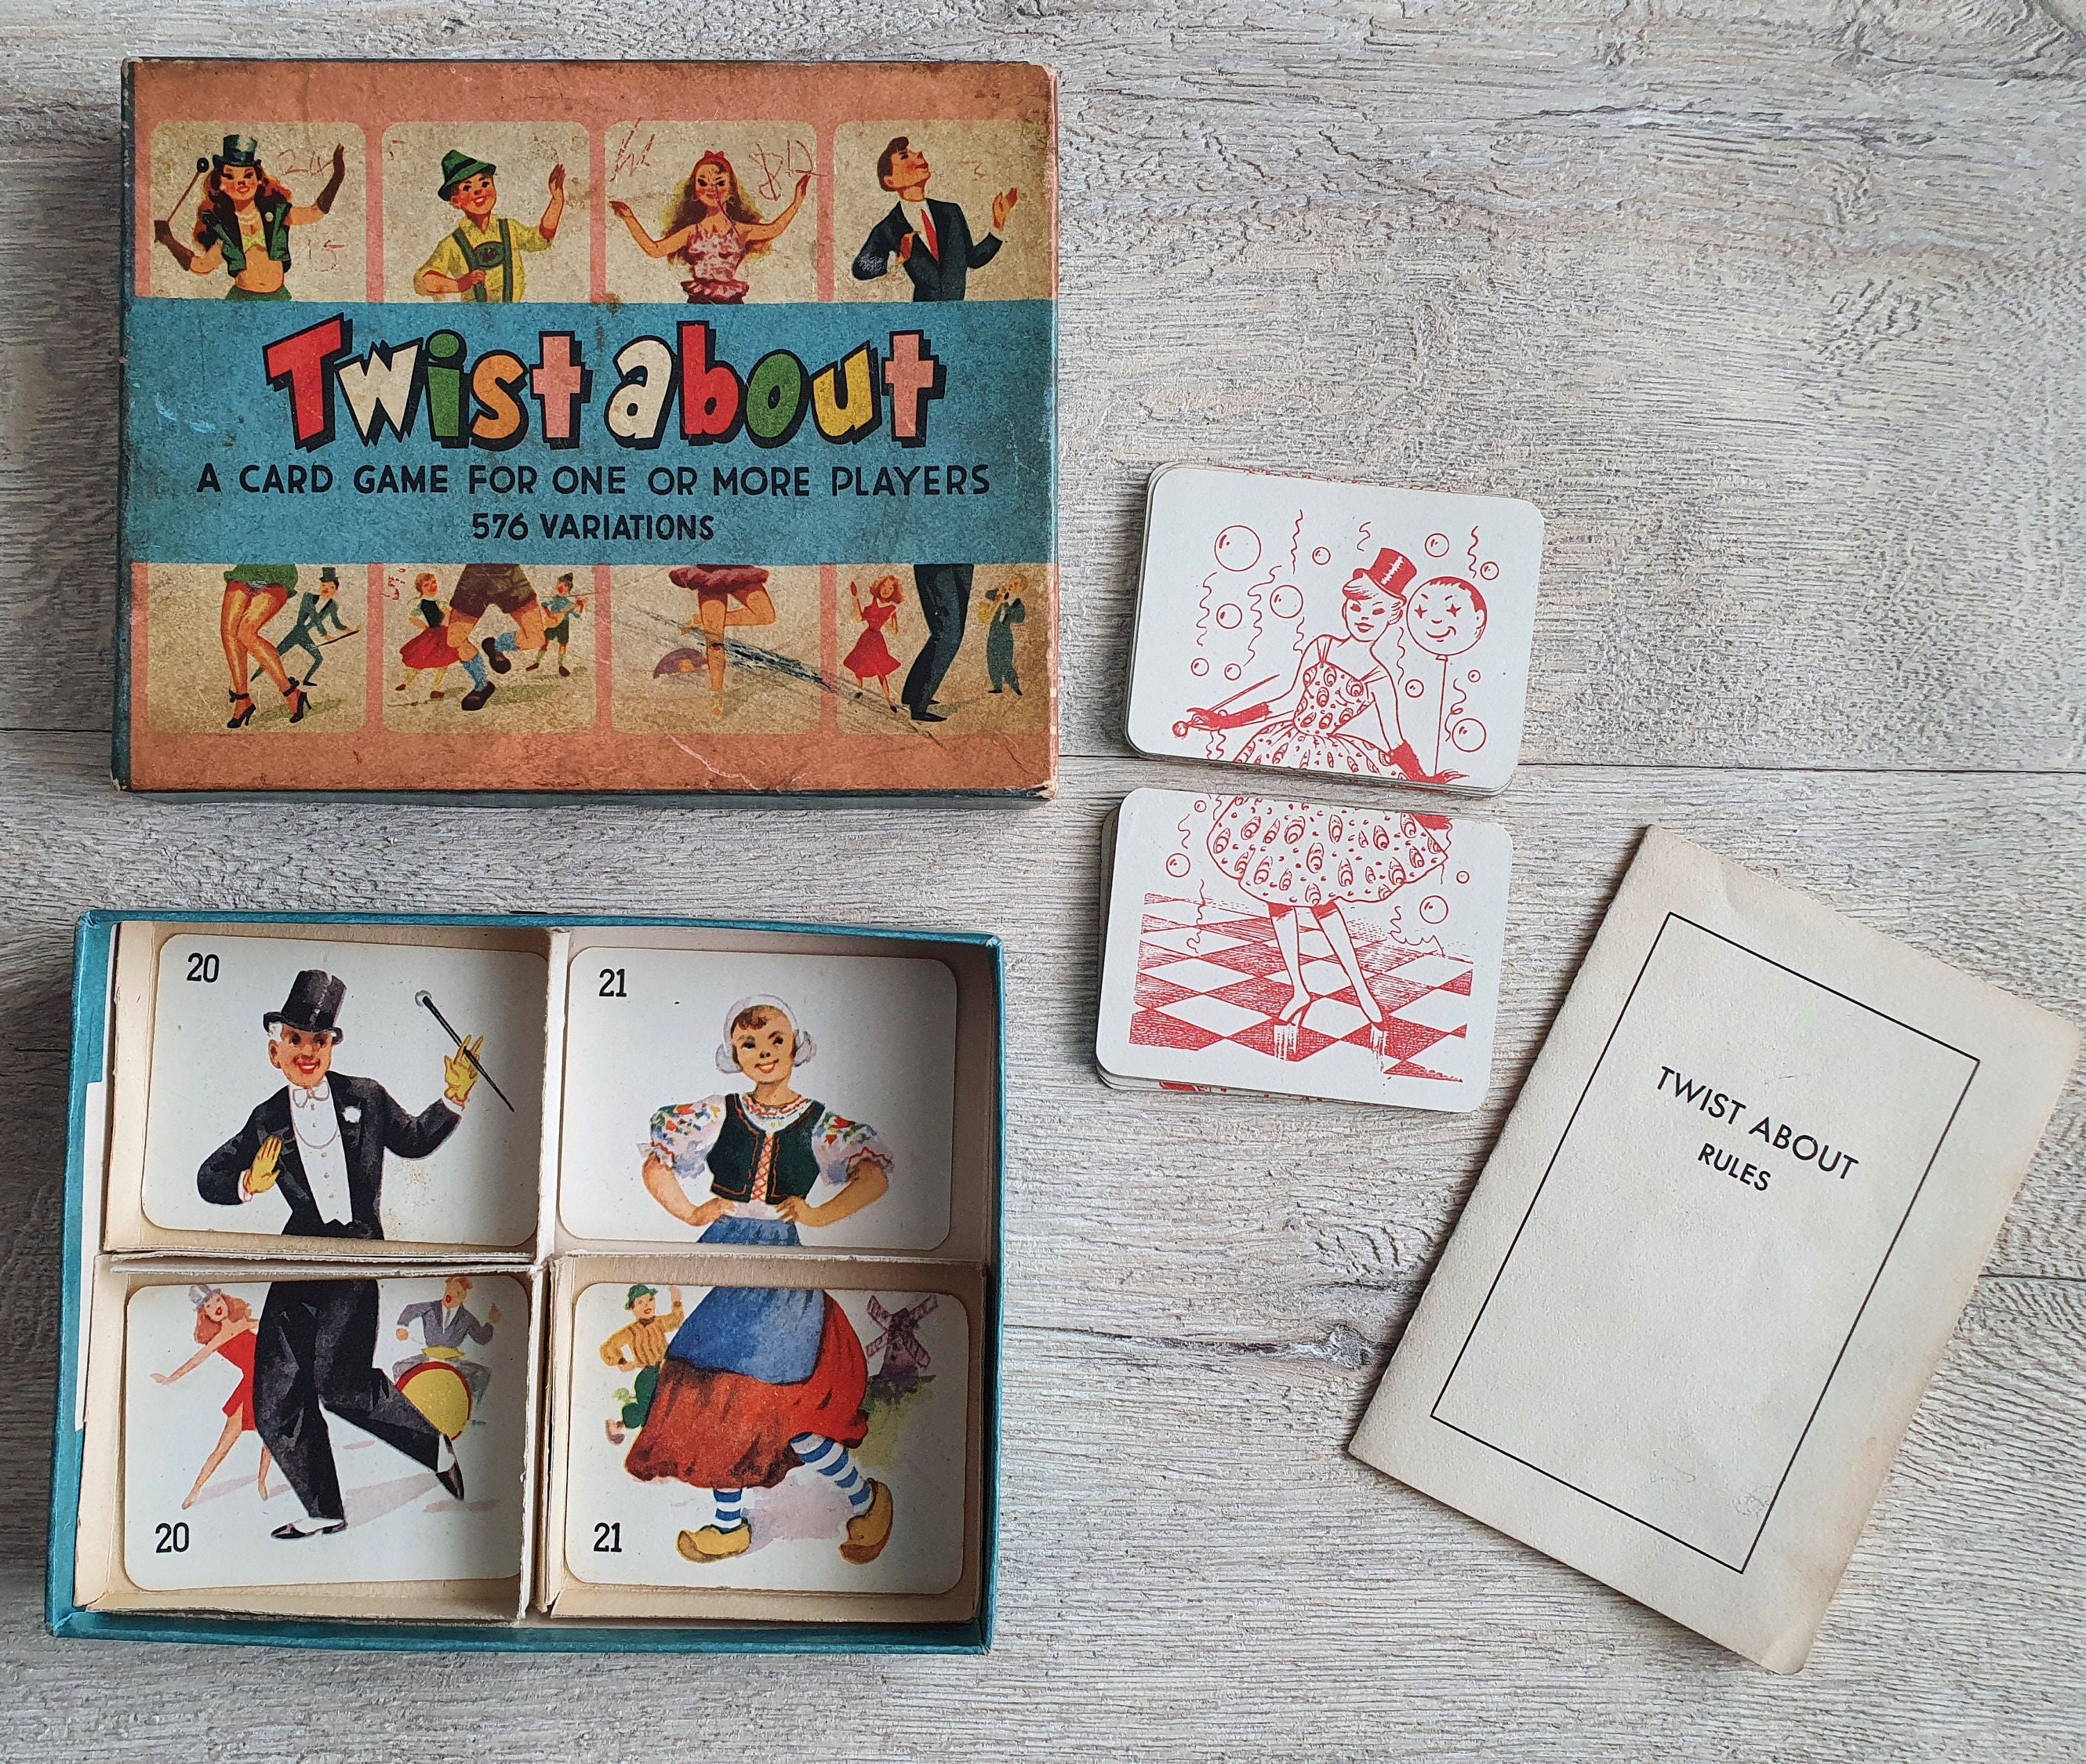 Game Vintage Card Game twist About Complete 